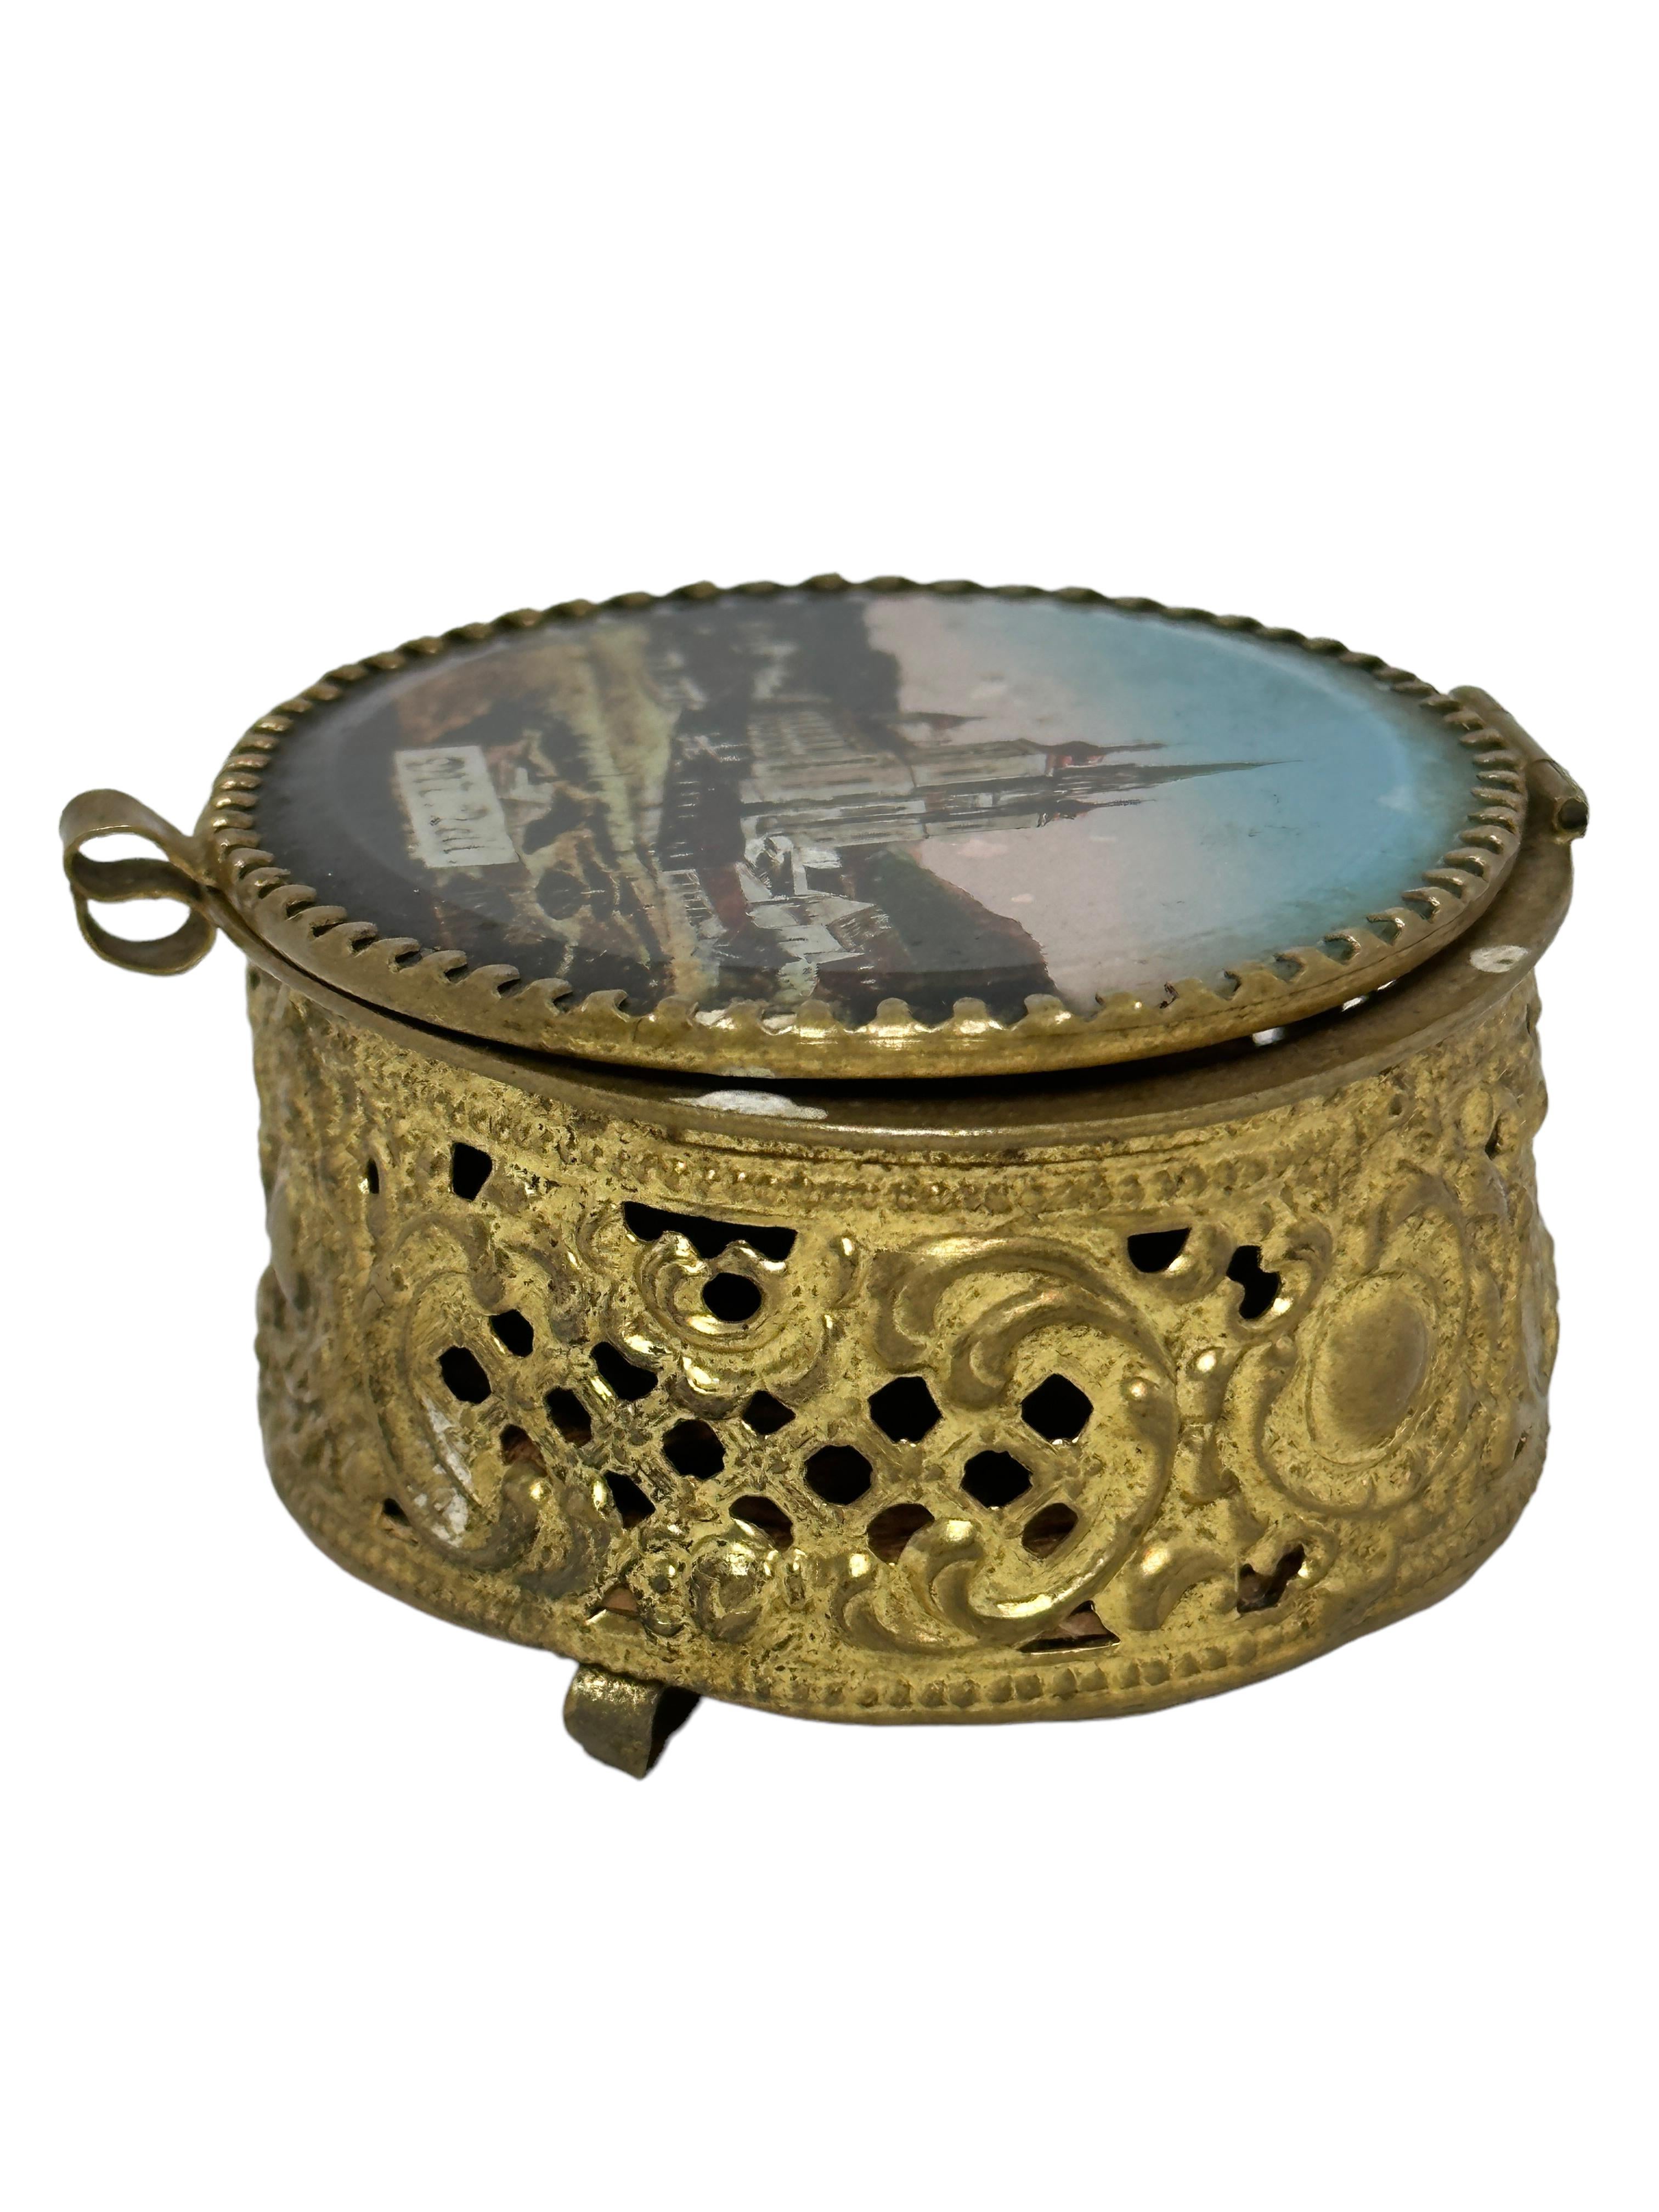 A gorgeous glass top trinket box made of ormolu. The hinged top featuring a view of the church of Maria Zell place of pilgrimage in Austria. No restoration has been carried out on this charming little trinket box, which remains in very stabile and